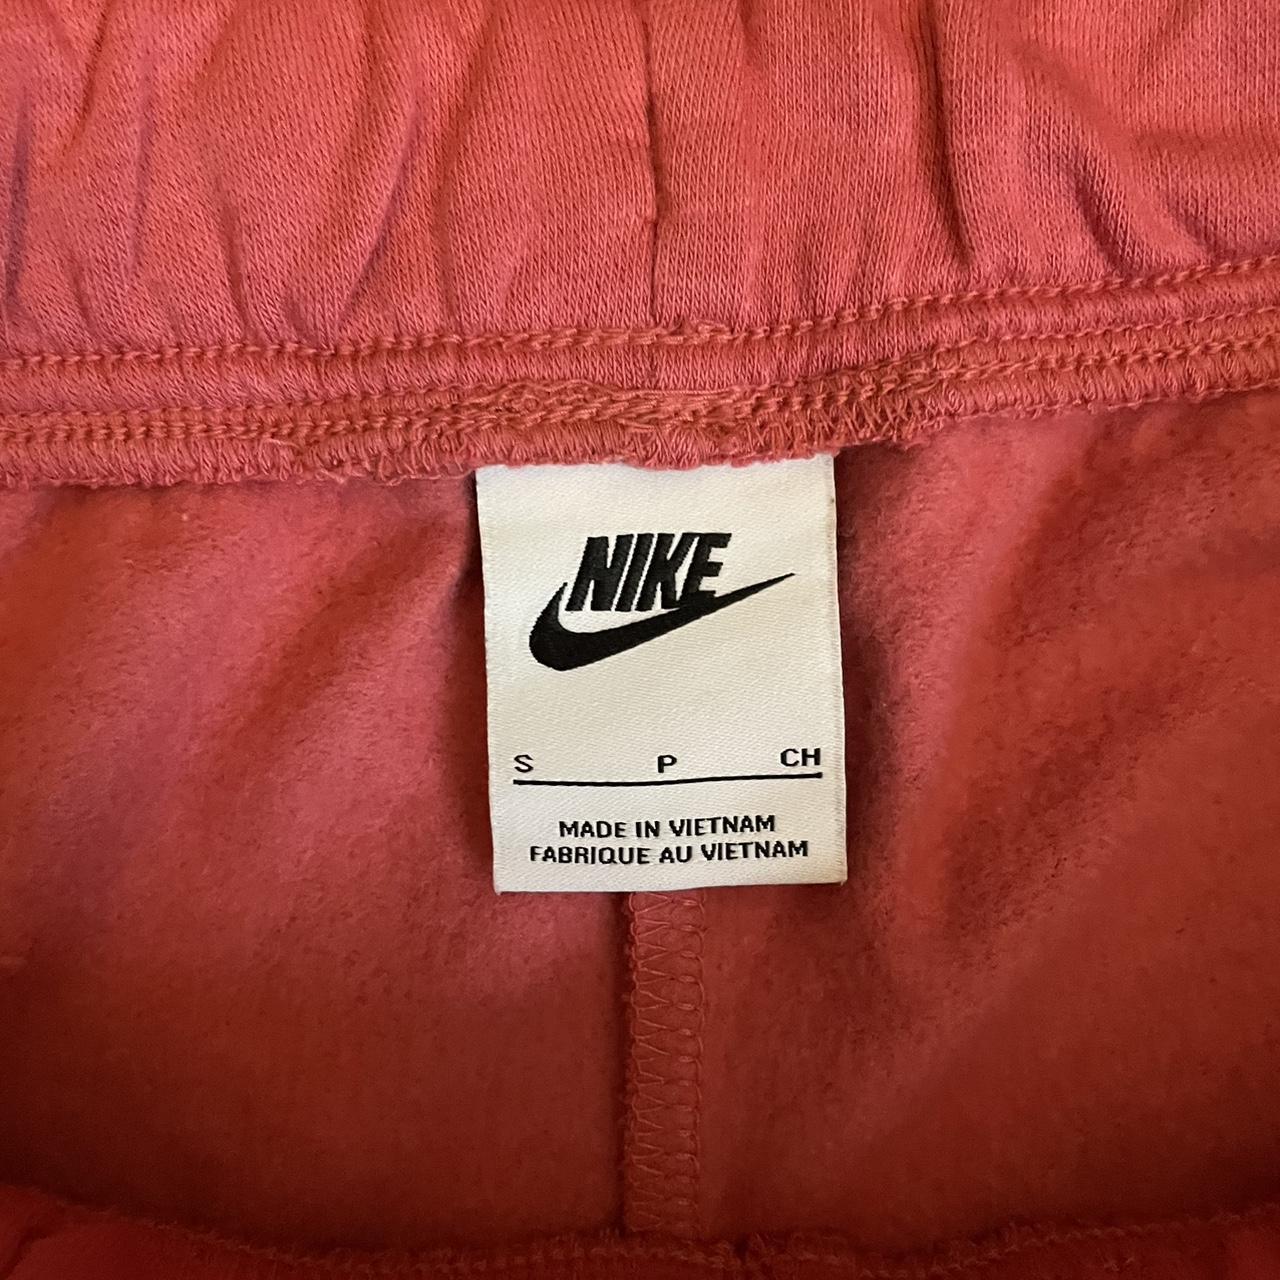 Nike Brand New Plus Size Coral Leggings. I needed a - Depop